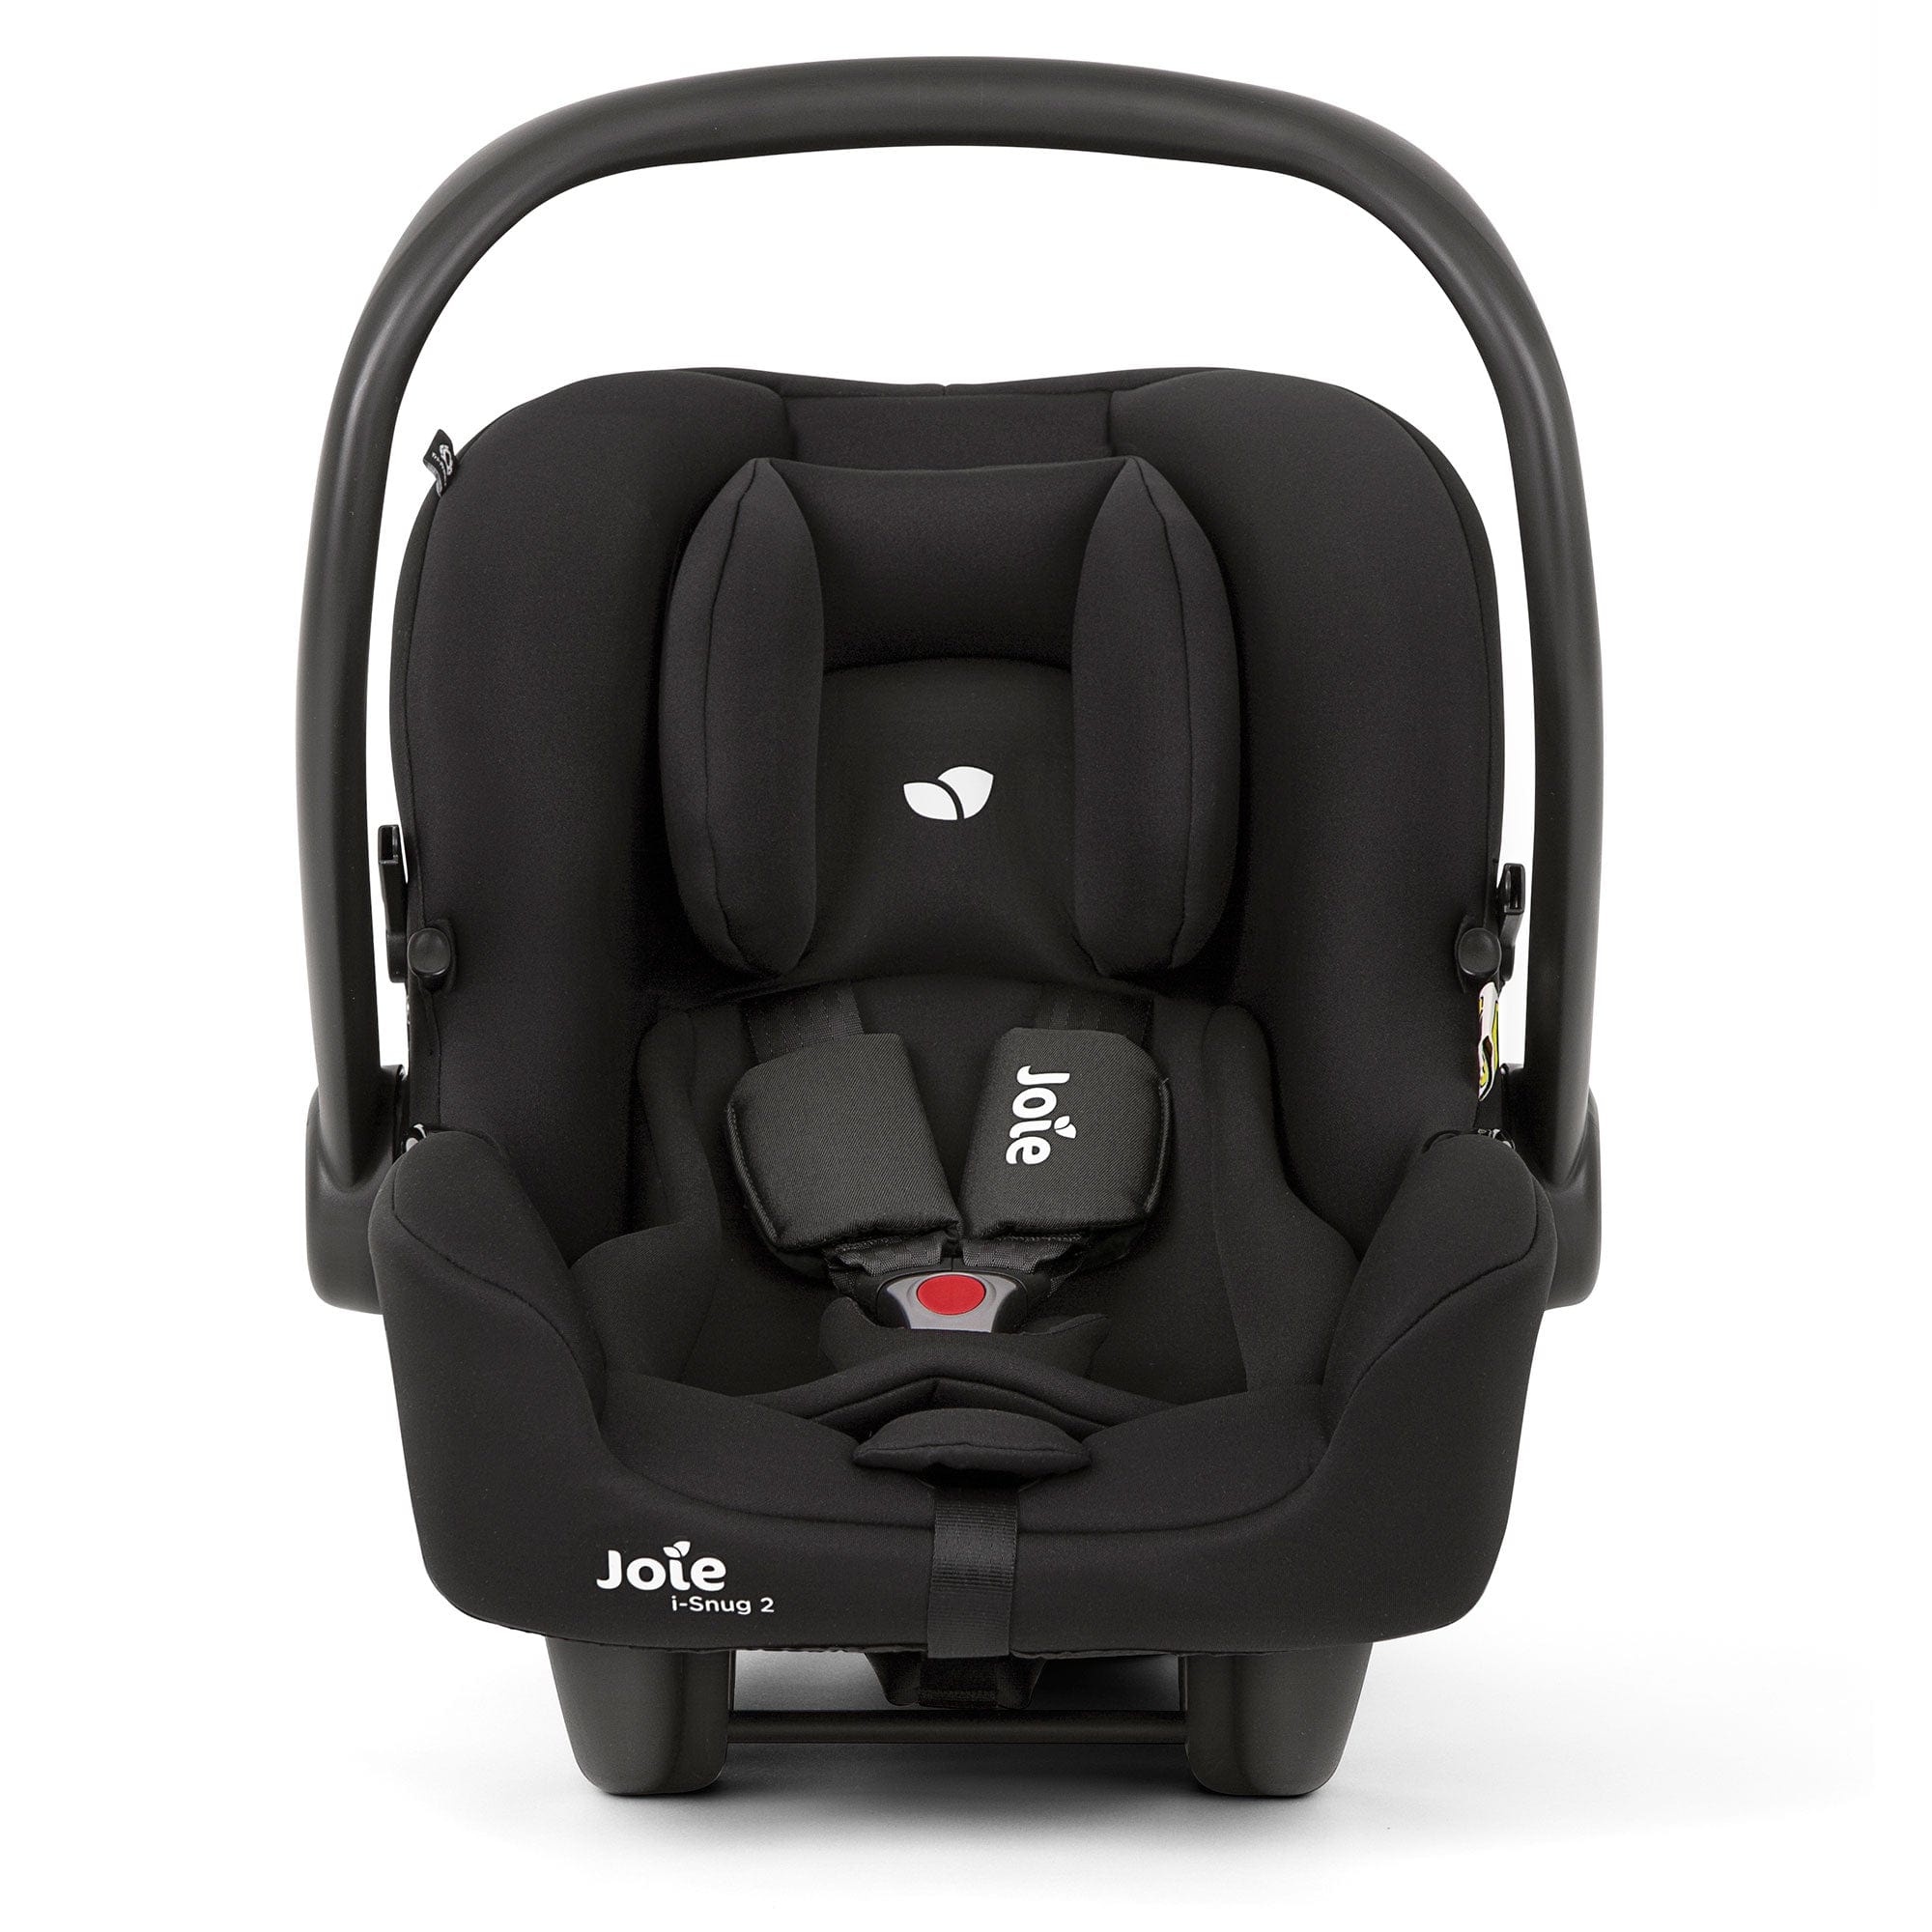 Joie i-Snug 2 i-Size Car Seat in Shale Toddler Car Seats C1817CAPEB000 5056080614984